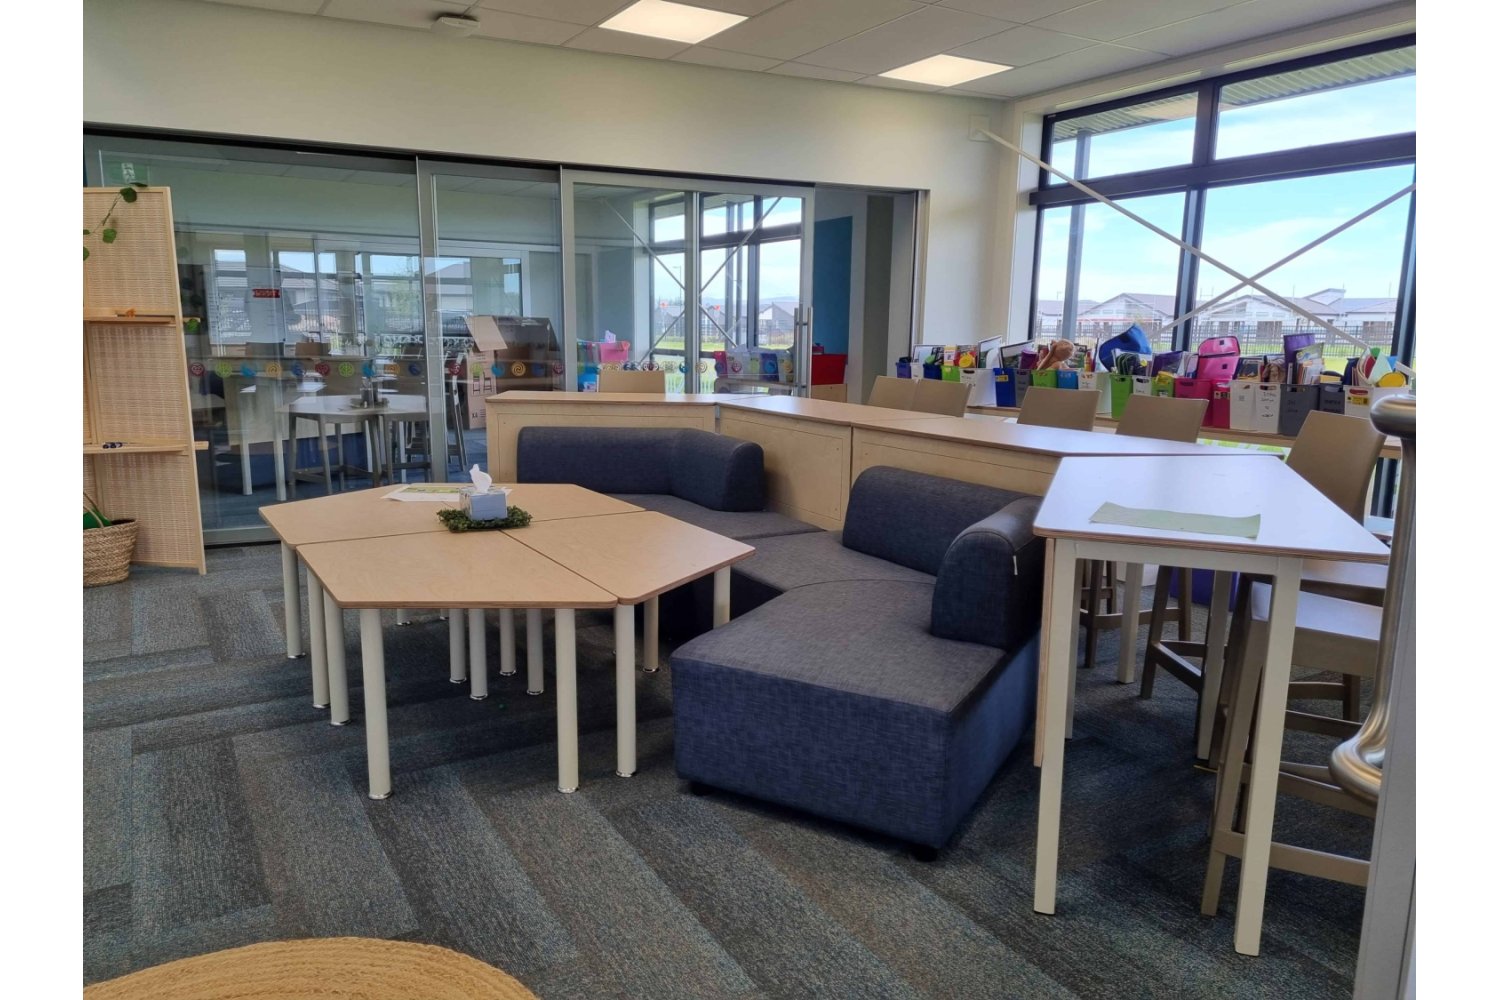 soft seating, school seating